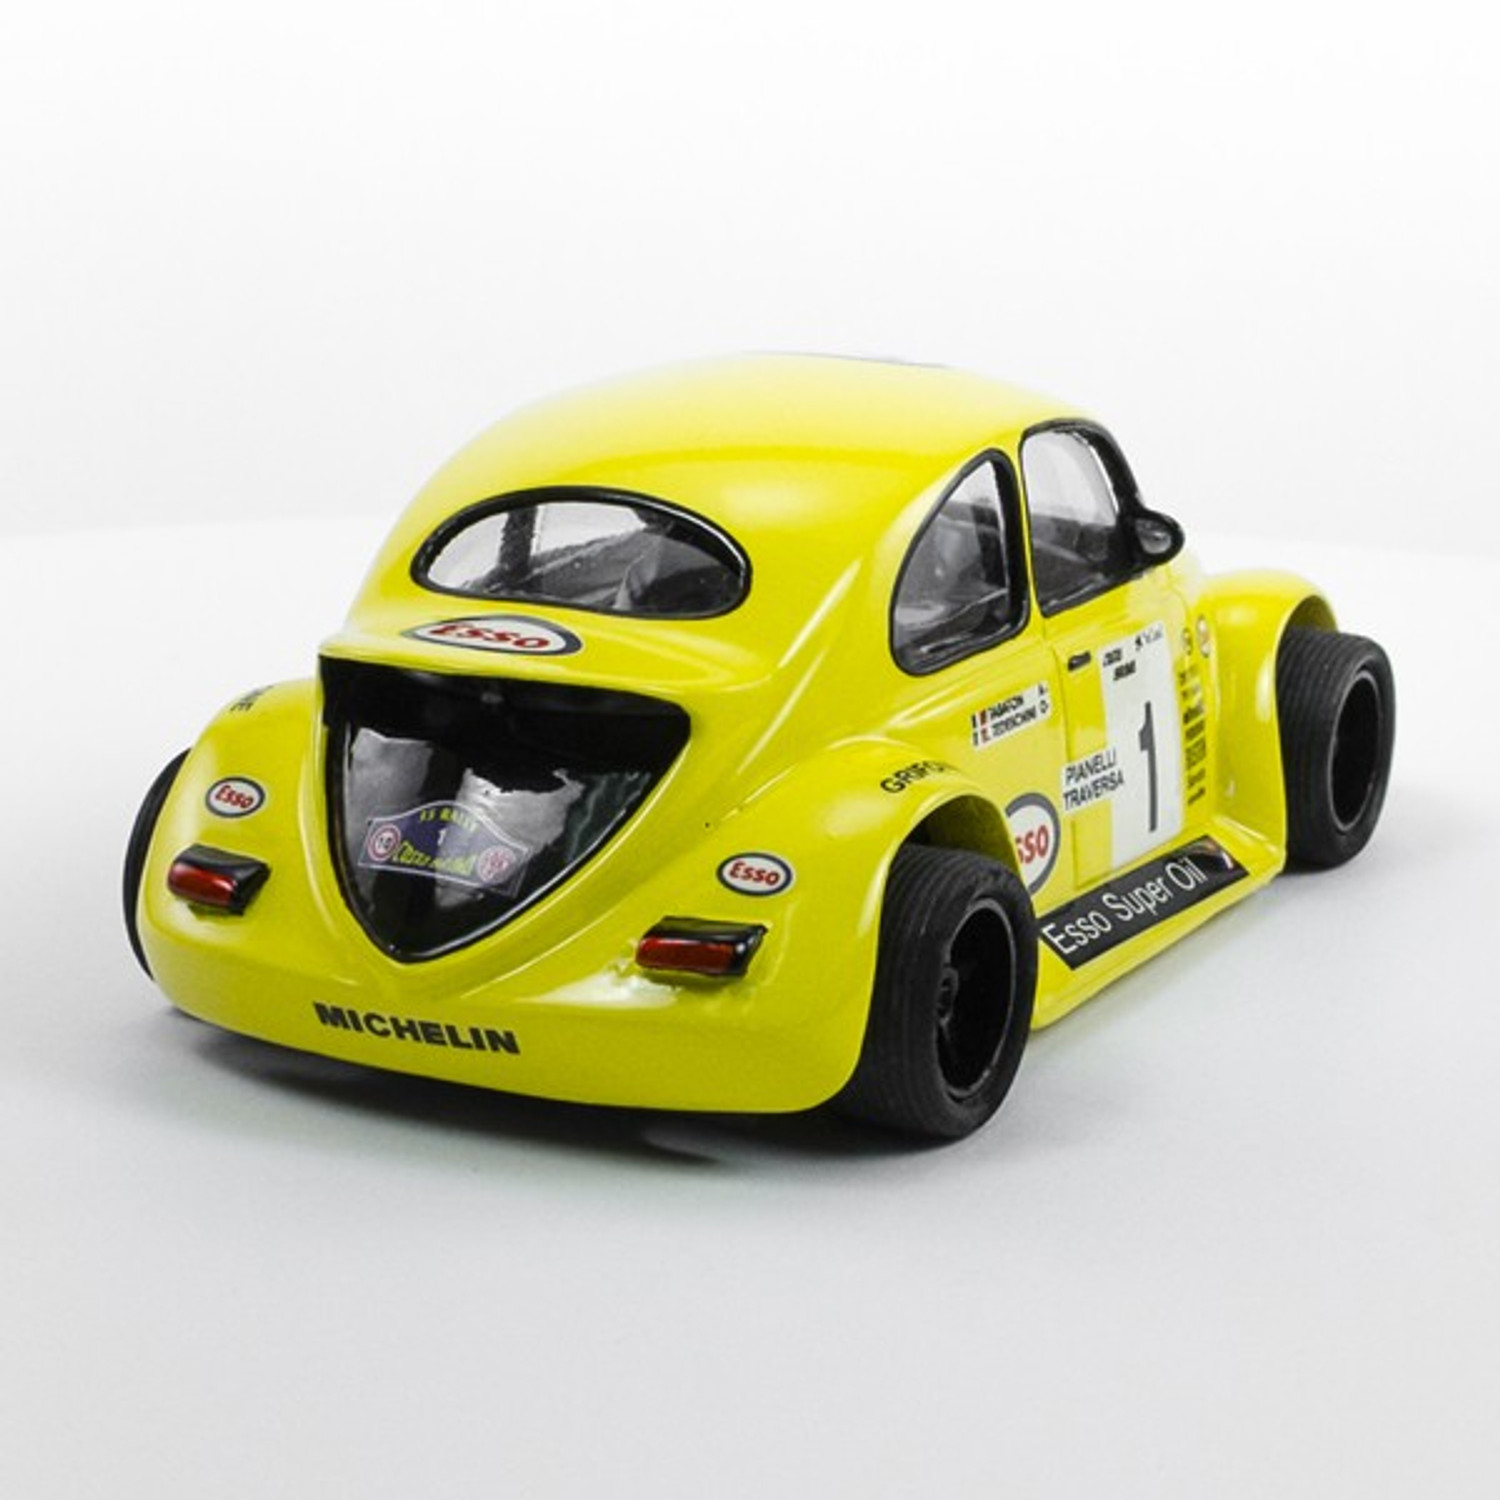 Stock Number: 16242 - Yellow Number 1 Car by Unknown